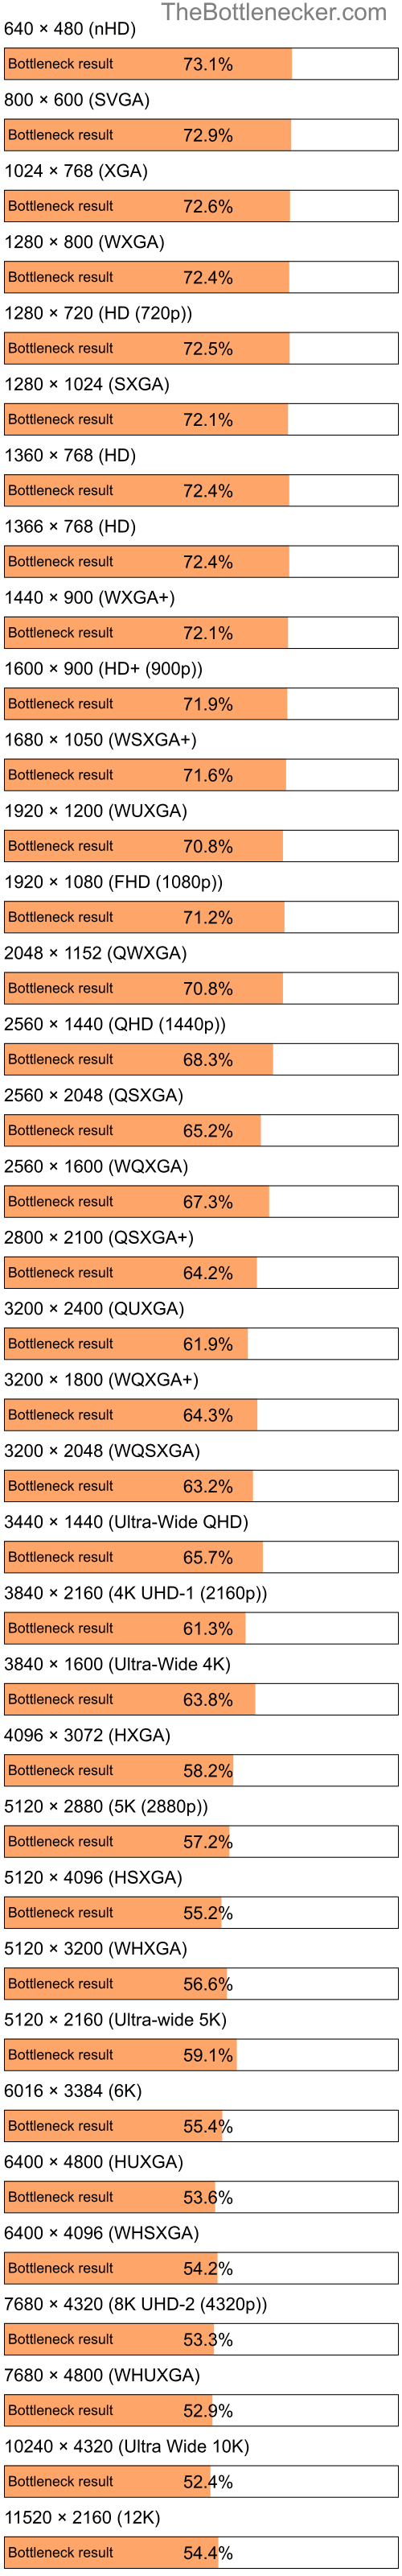 Bottleneck results by resolution for Intel Atom C2750 and NVIDIA GeForce RTX 3080 in General Tasks